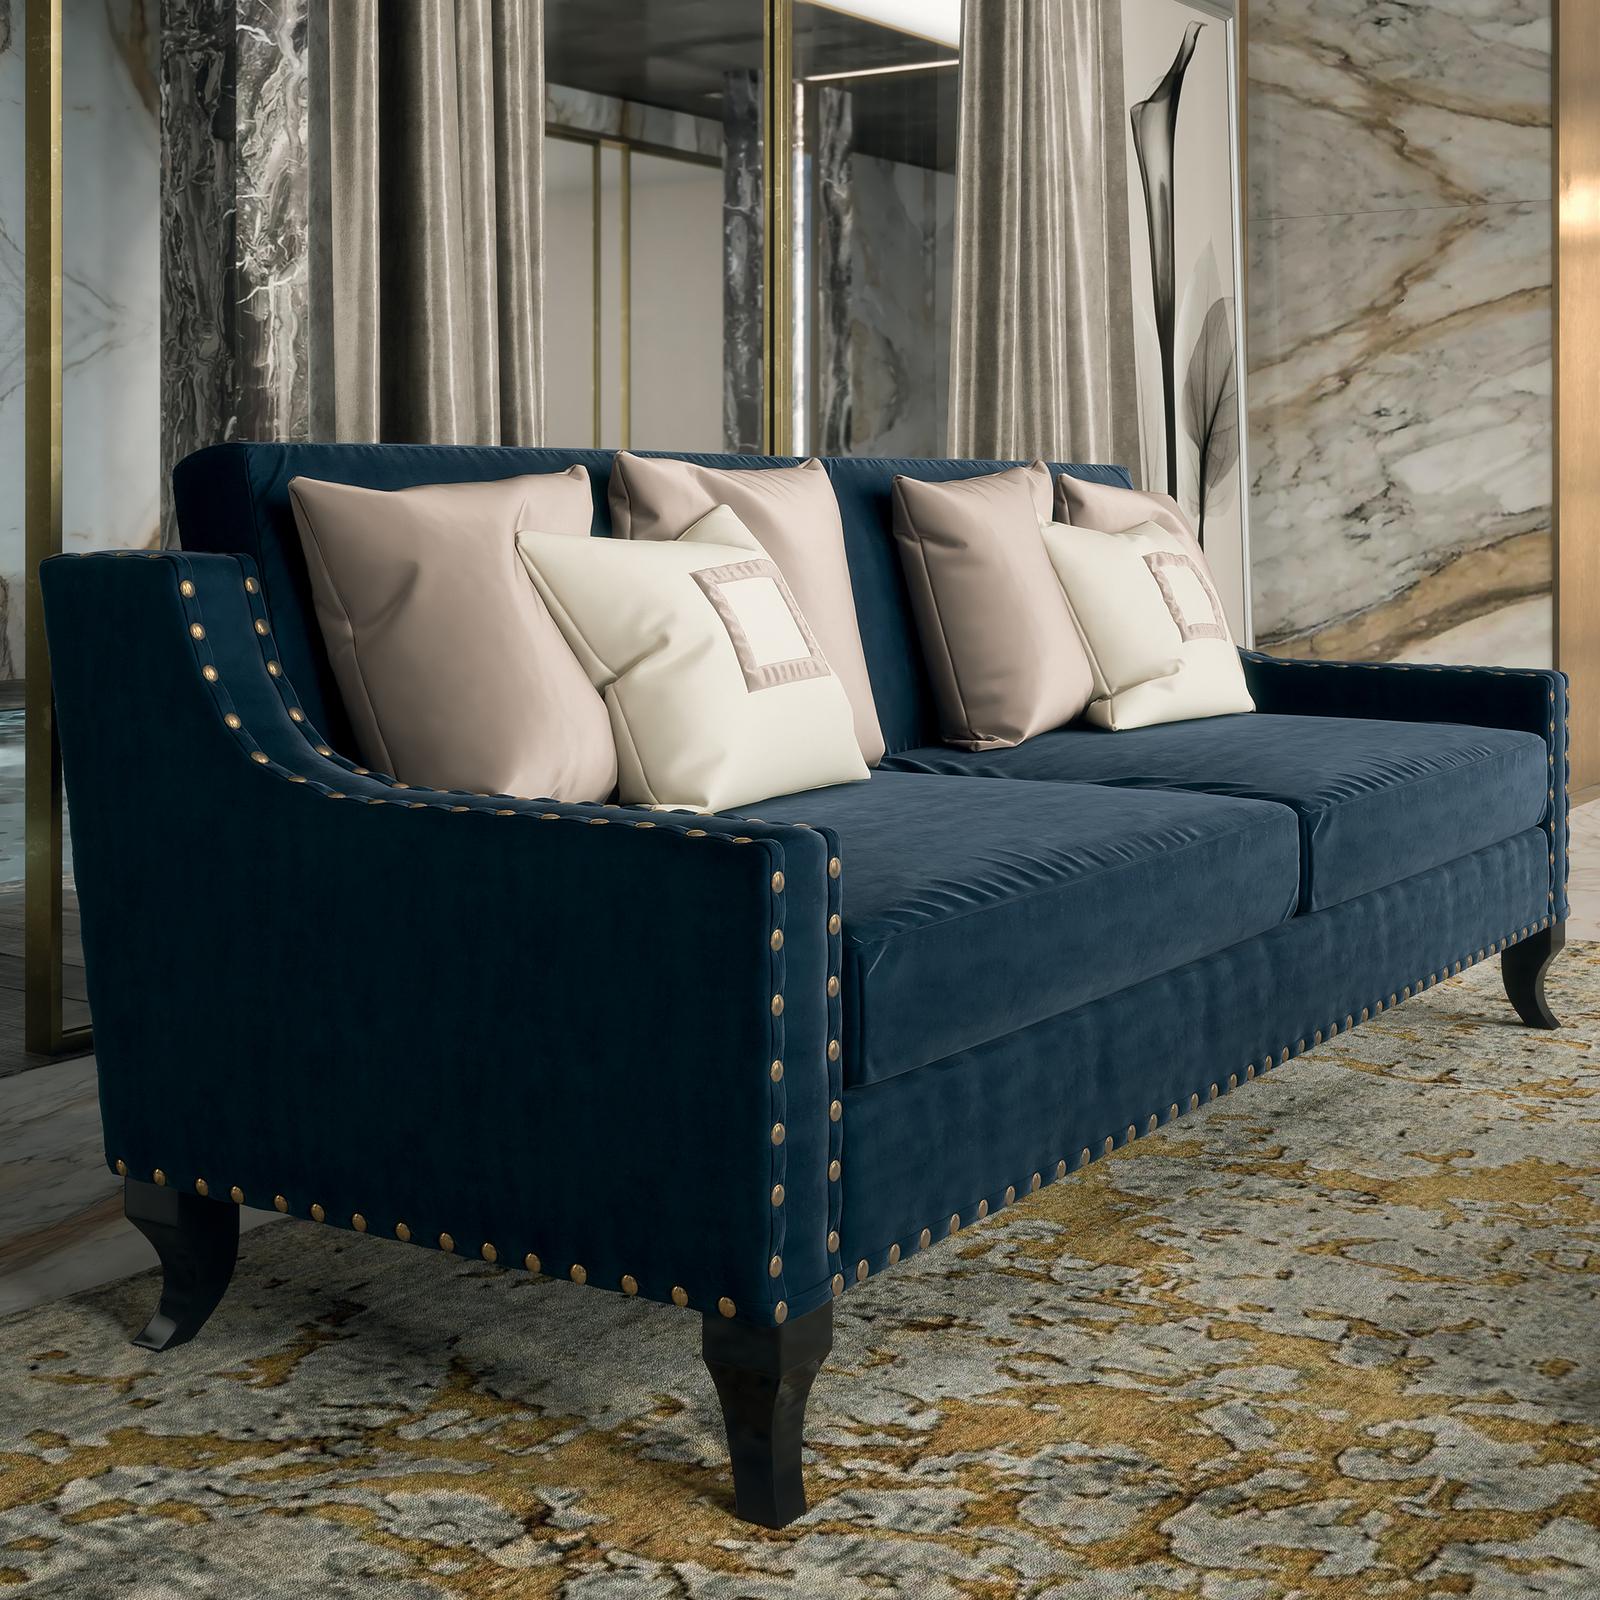 Stylish and comfortable, this 3-seat sofa is part of the Oscar collection. Boasting a refined level of taste, the piece is perfect for any setting with an exquisitely contemporary and cosmopolitan flavor. Combining tradition and modernity with an